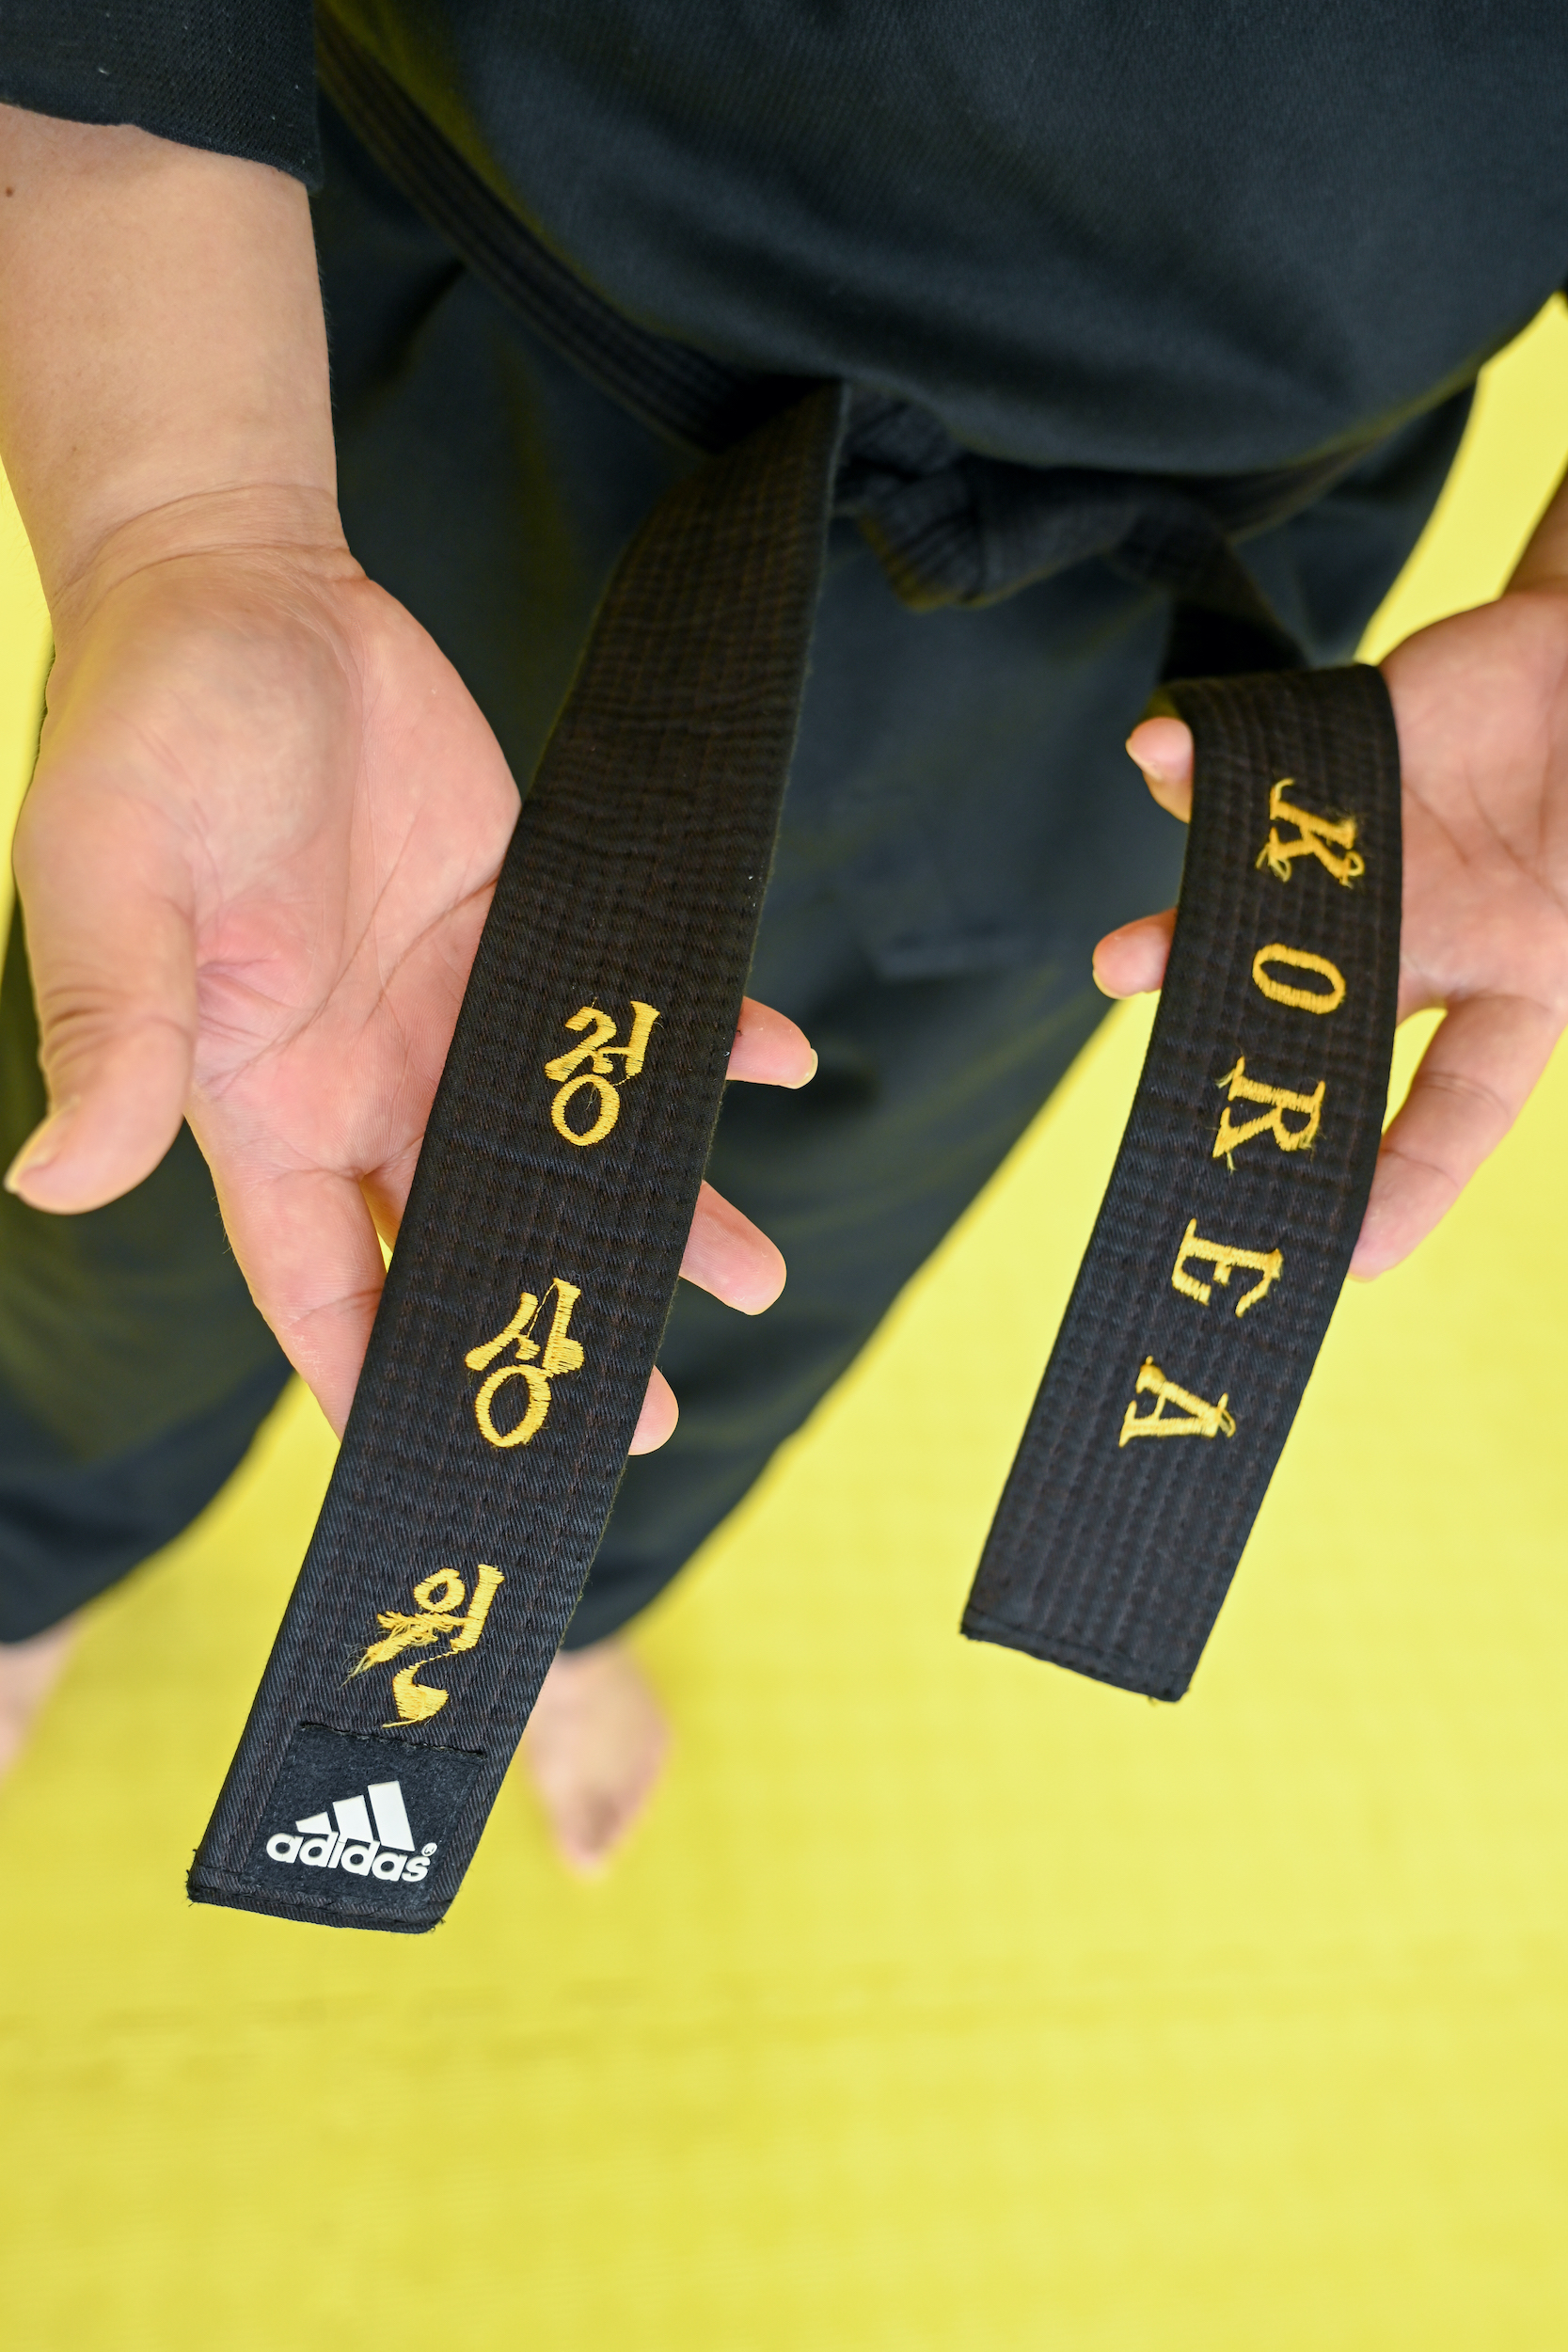 Master Jeong holds up the ends of his black belt. One side has the word 